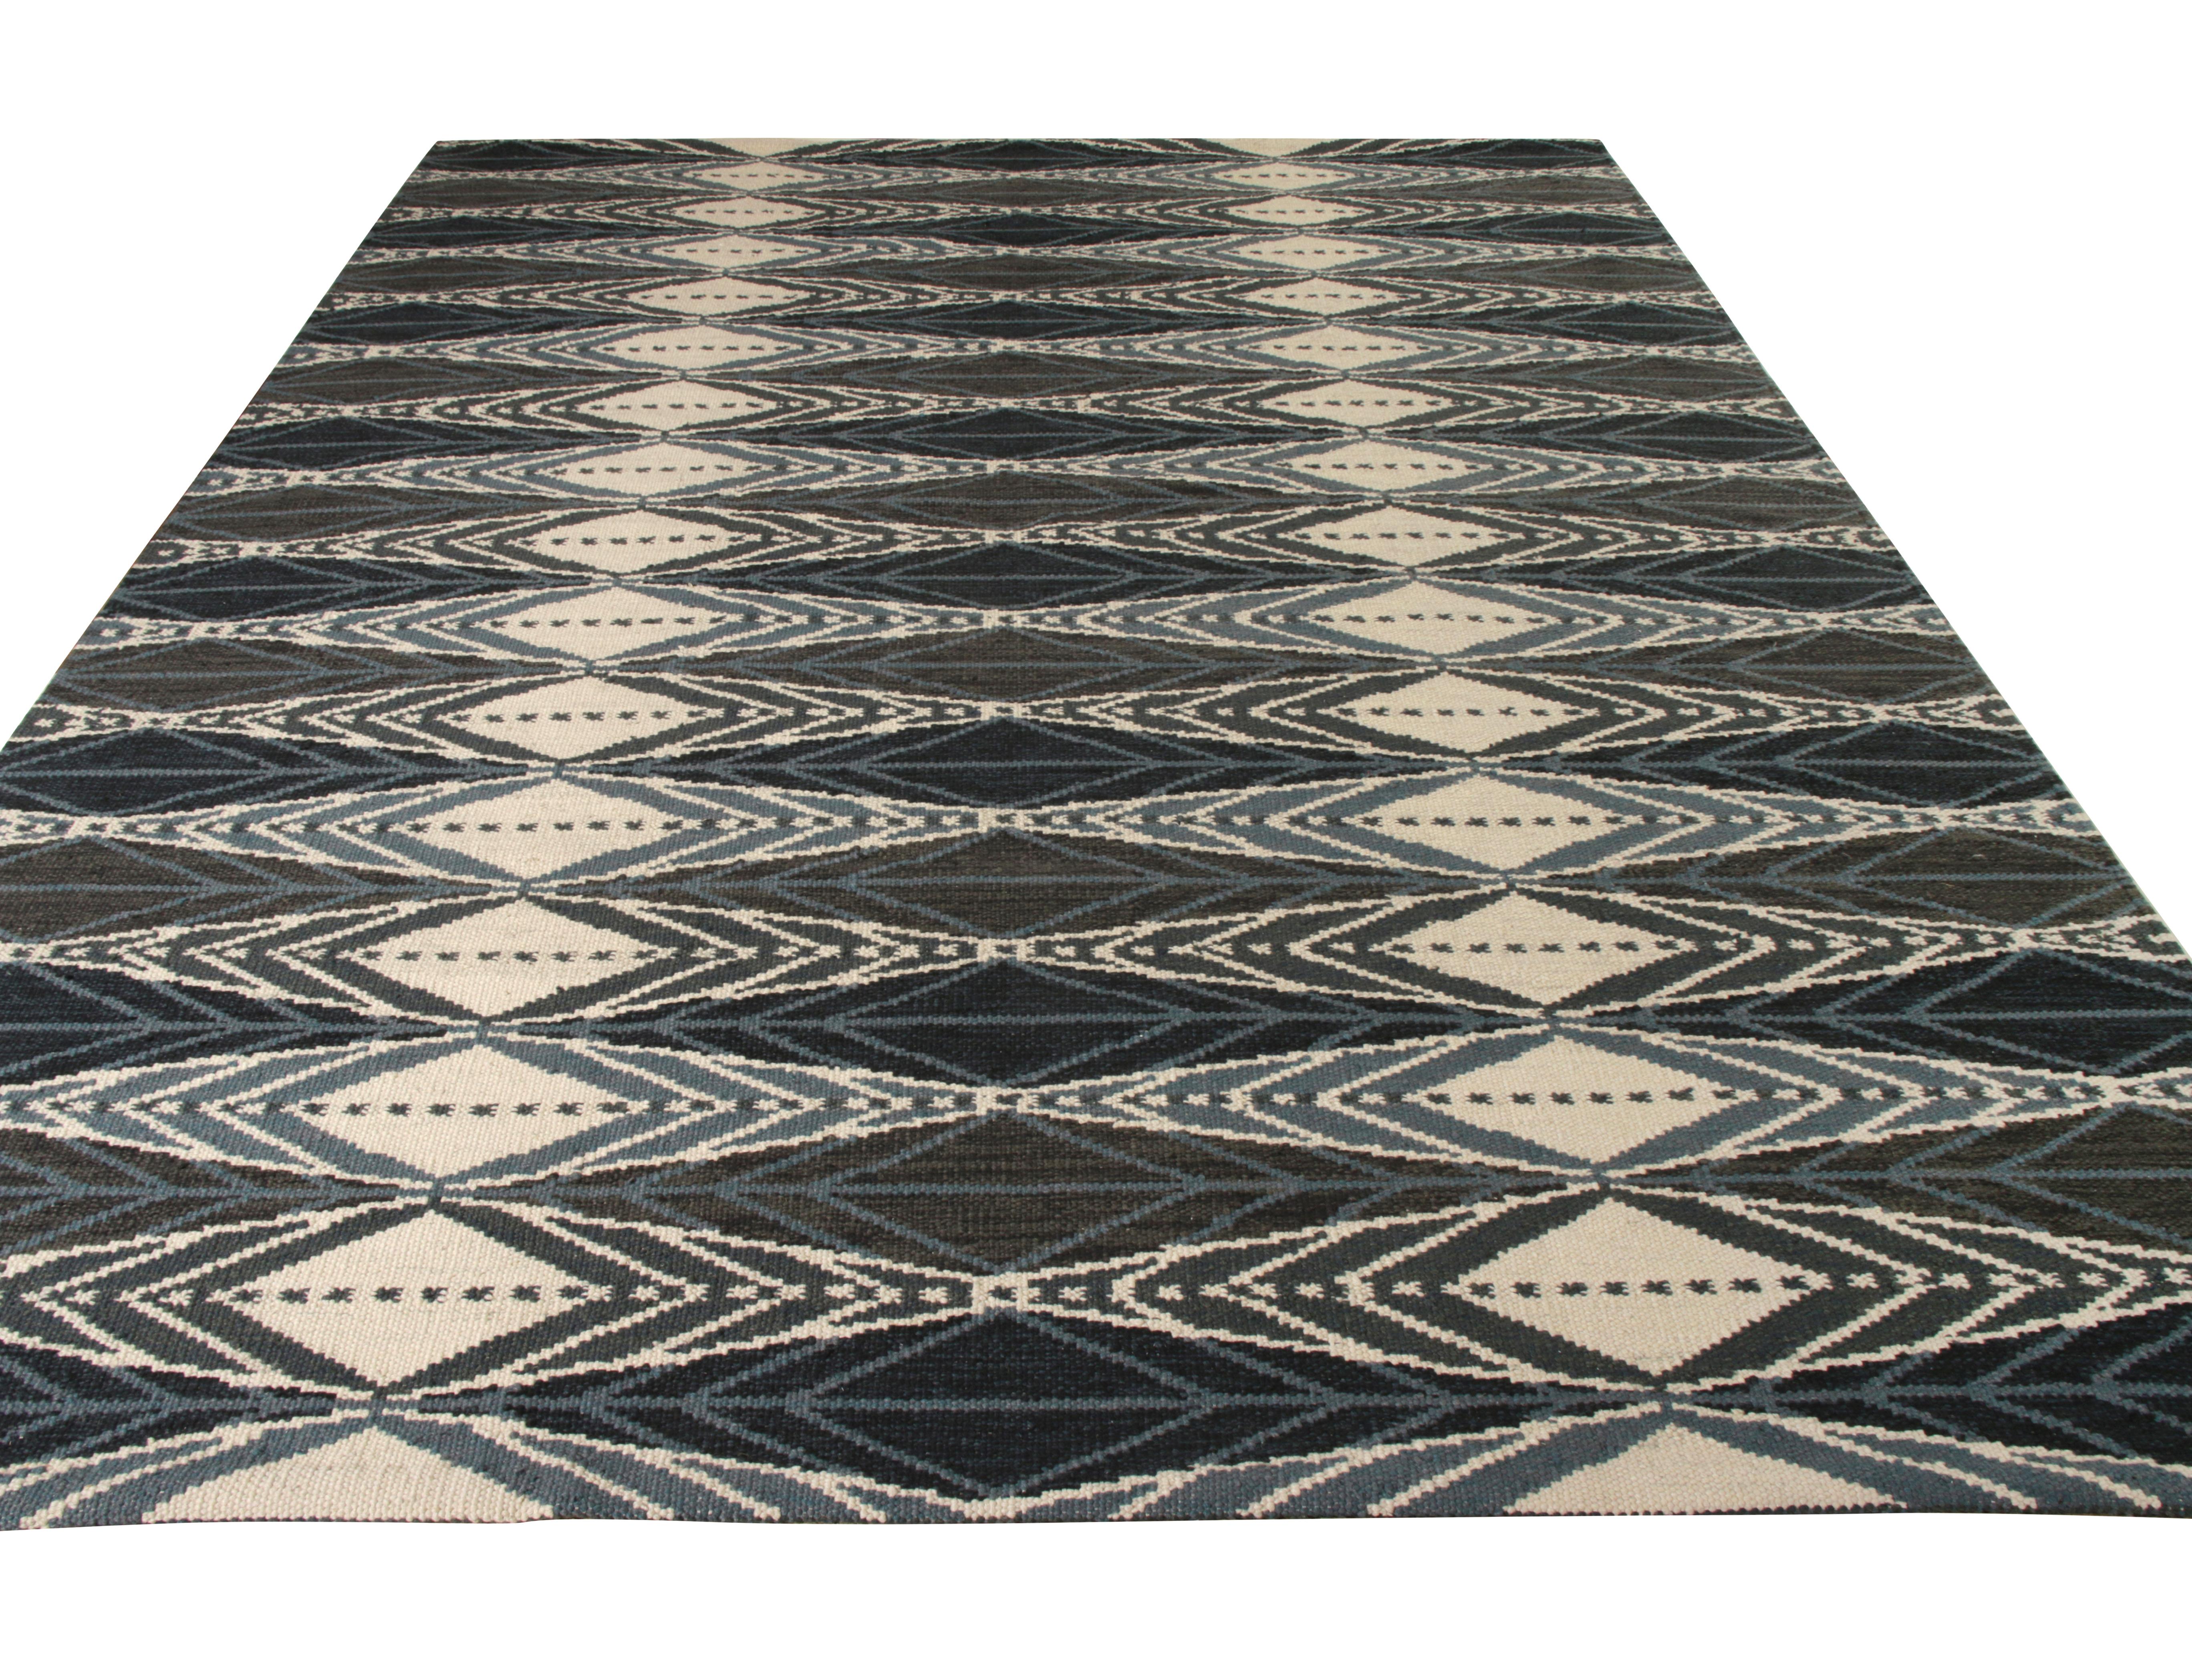 A 9 x 11 Kilim rug from Rug & Kilim’s Scandinavian Nu—the latest unique texture added to the award-winning collection. The blissful unison of a symmetric geometric pattern in sophisticated hues of blue and gray create a mesmerizing illusion with